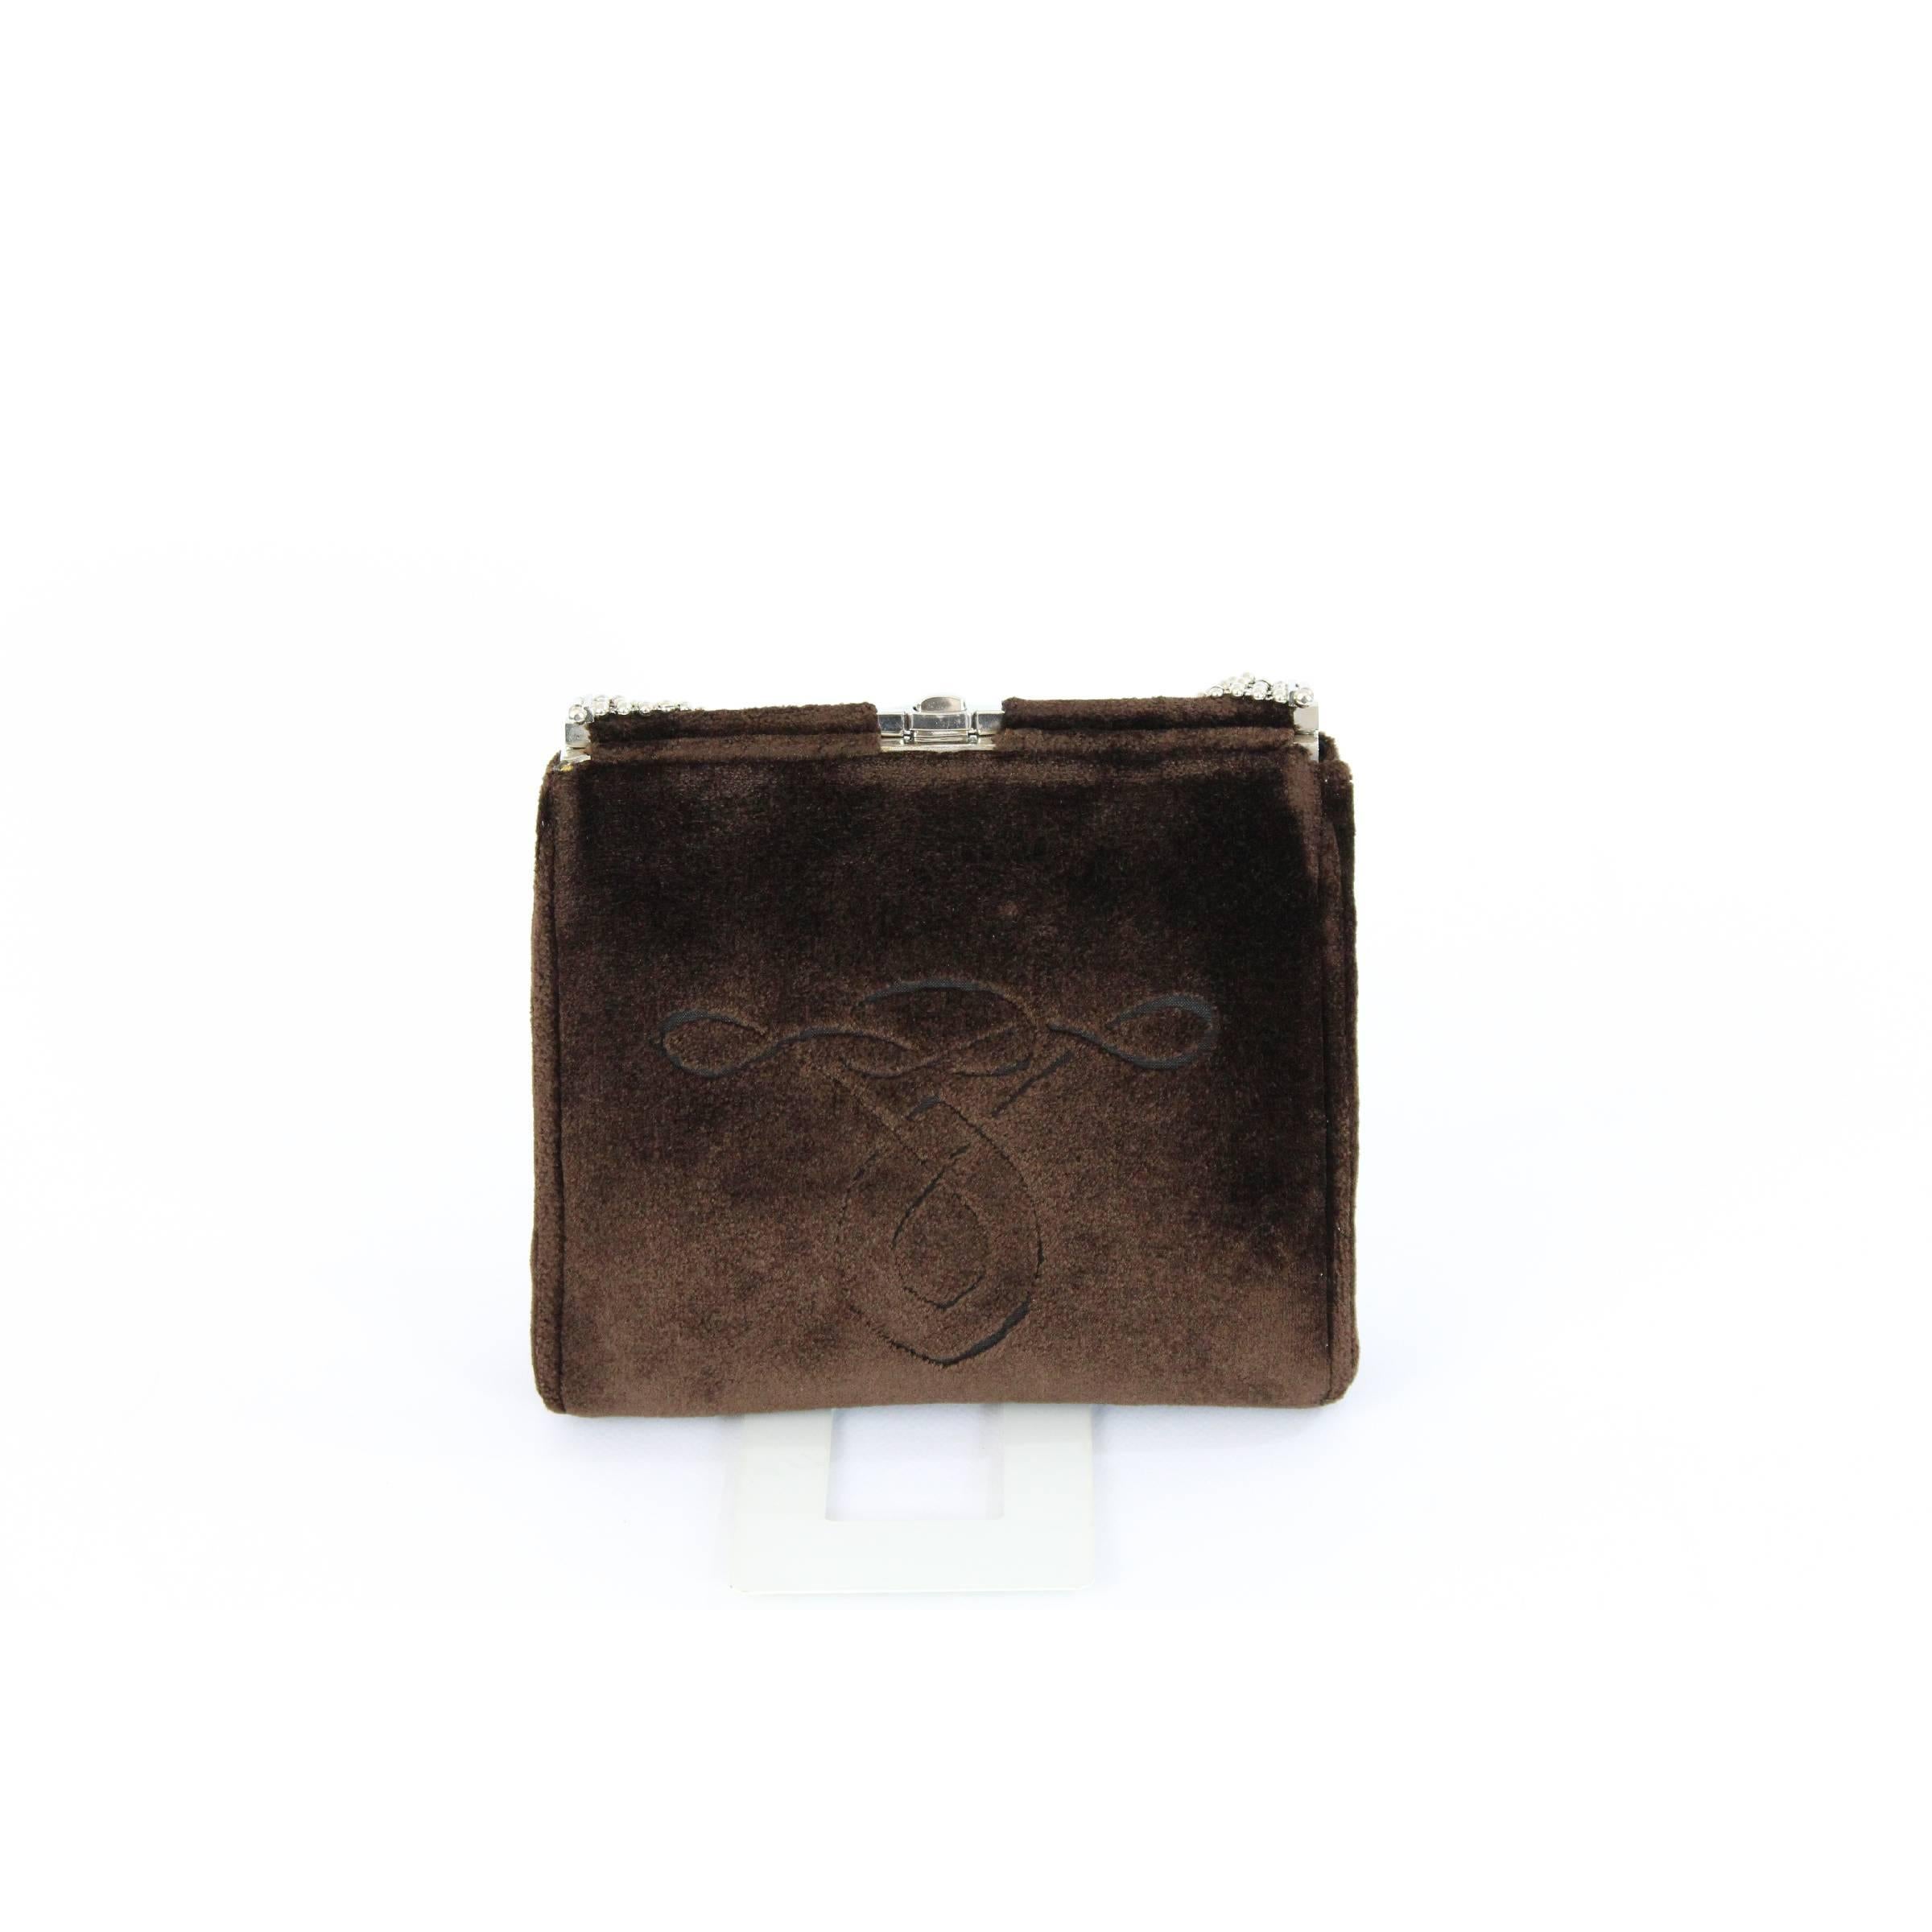 Cesare Piccini evening bag, brown velvet with chain shoulder strap, clasp closure, silver-colored details, leather interior. Original vintage 1960. Made in Italy. Excellent vintage conditions.

Measurements:
height: 17 cm
length: 19 cm
width: 6